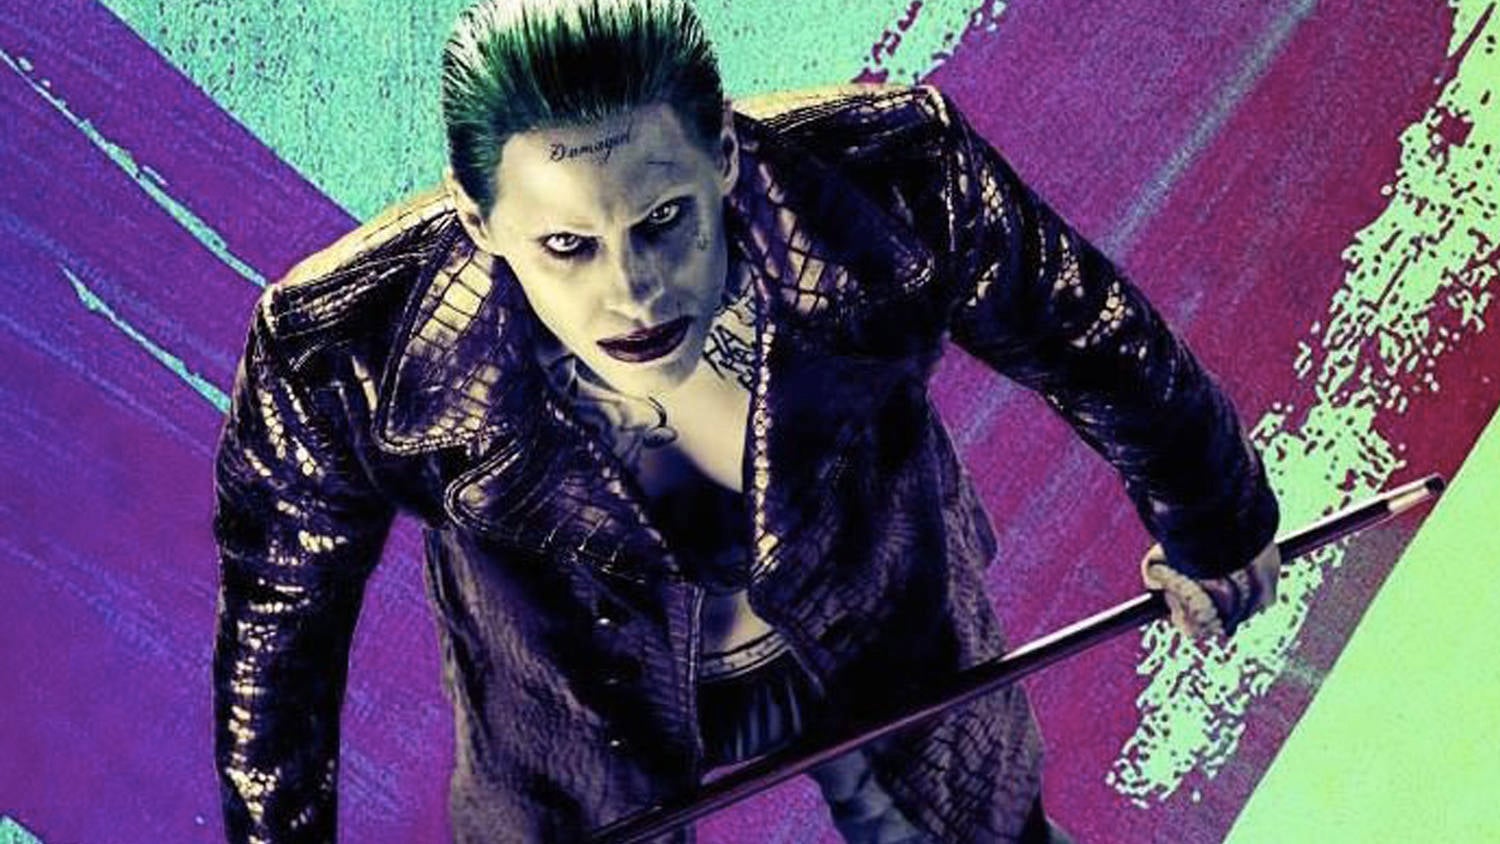 Suicide Squad: Could Jared Leto's Joker Return Mean the Ayer Cut Is on the Way?